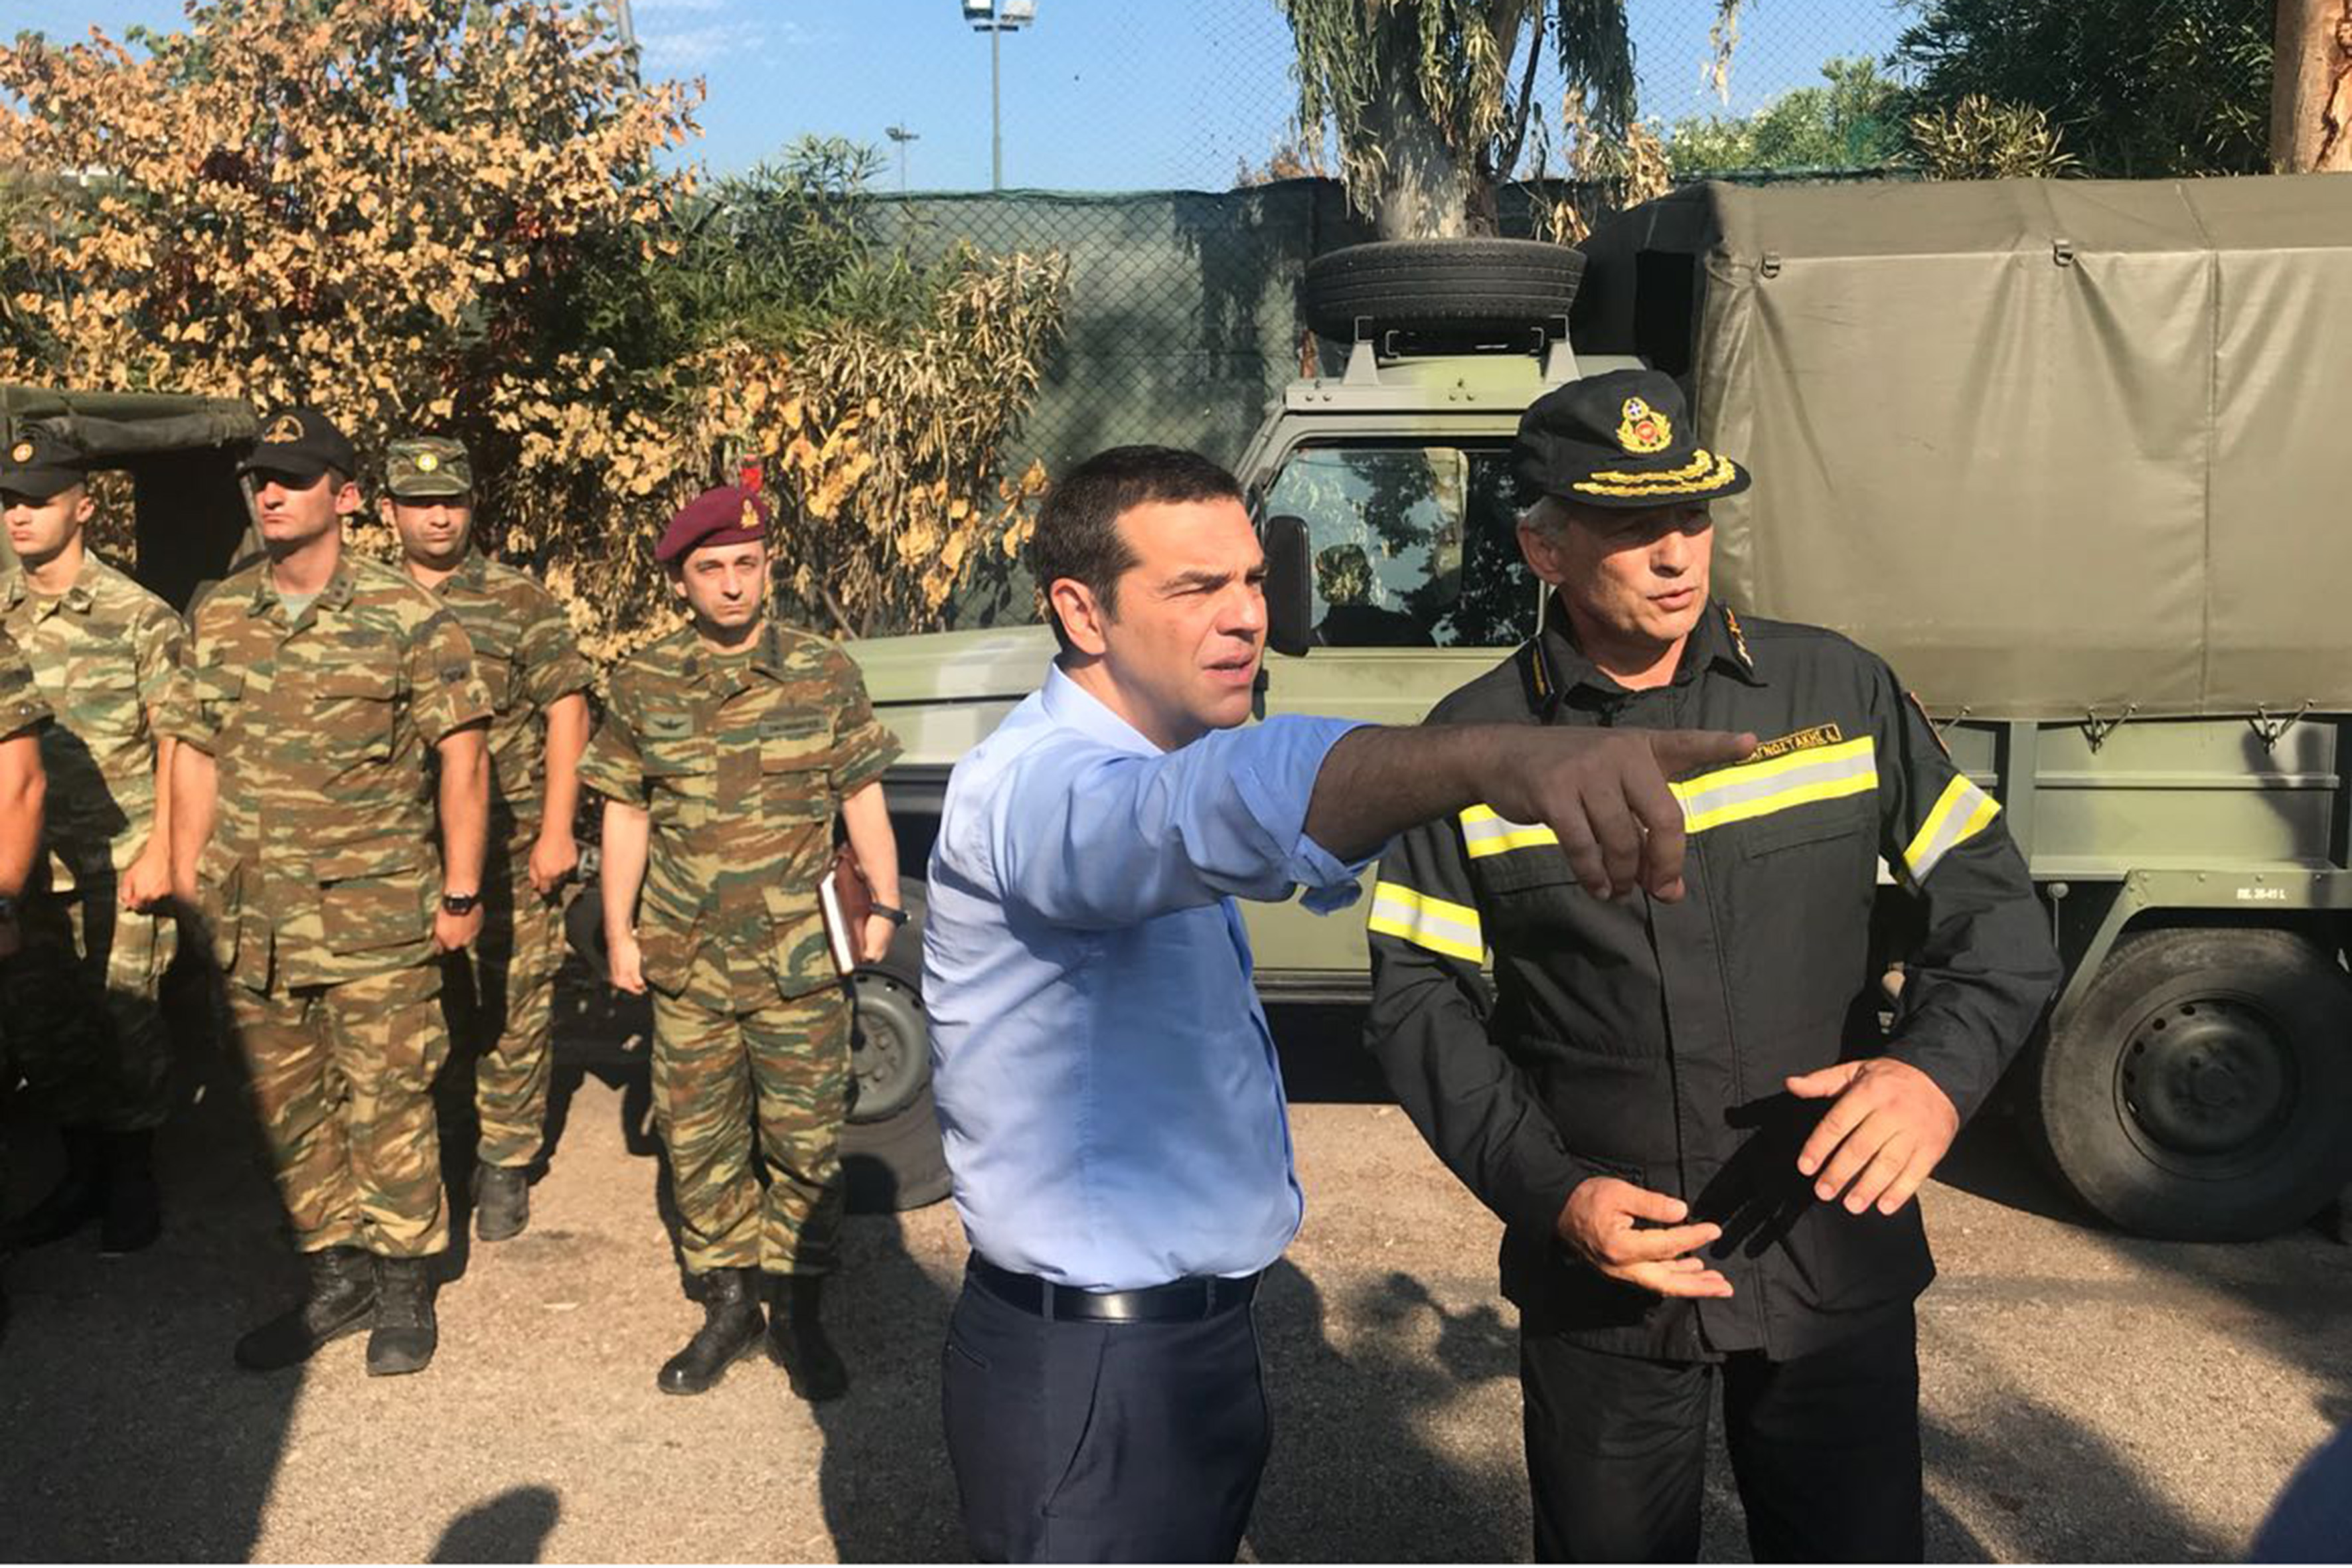 Tsipras blasted over wildfire management on Twitter